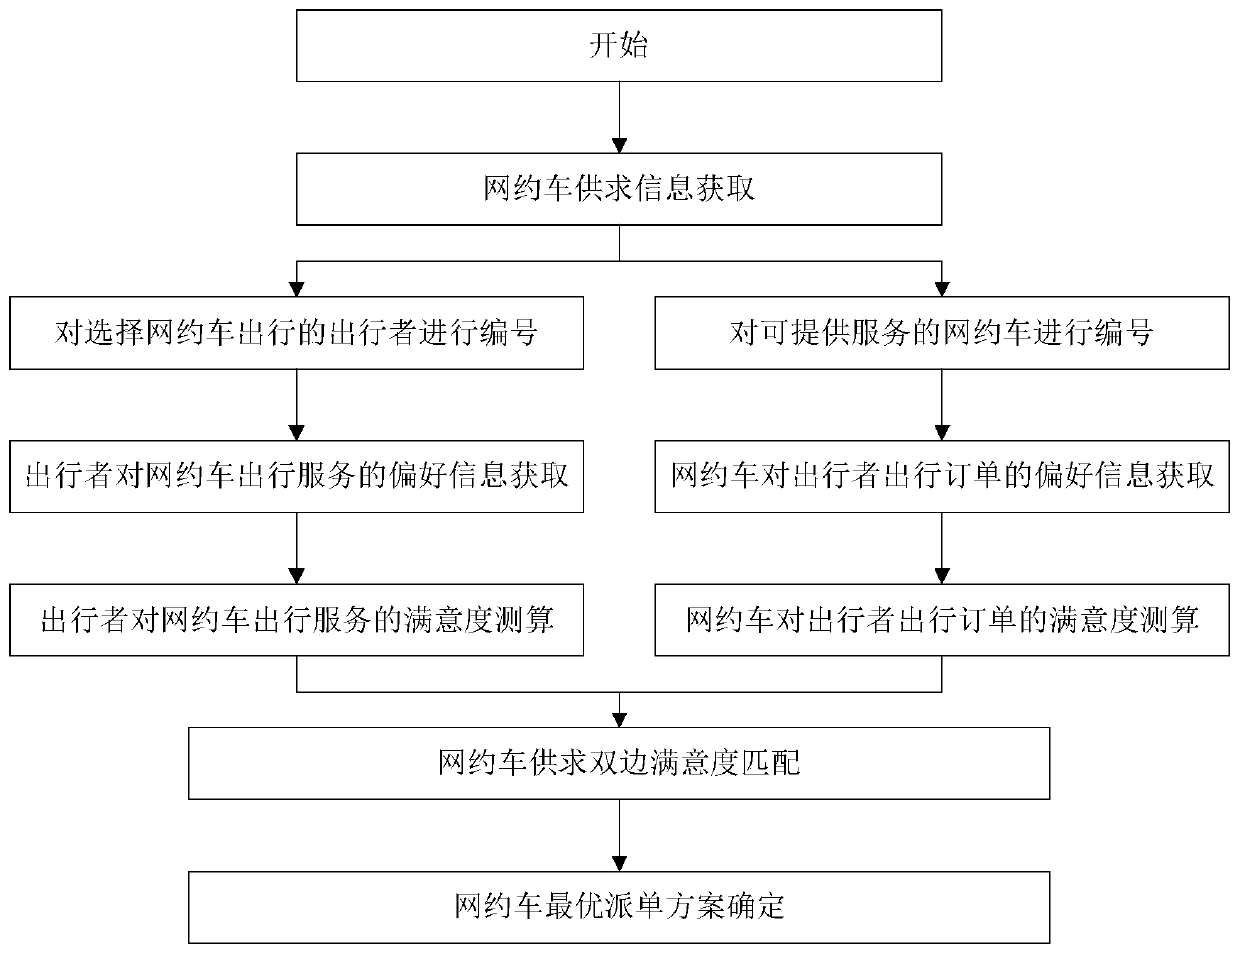 Online car-hailing order dispatching method based on supply and demand bilateral satisfaction matching